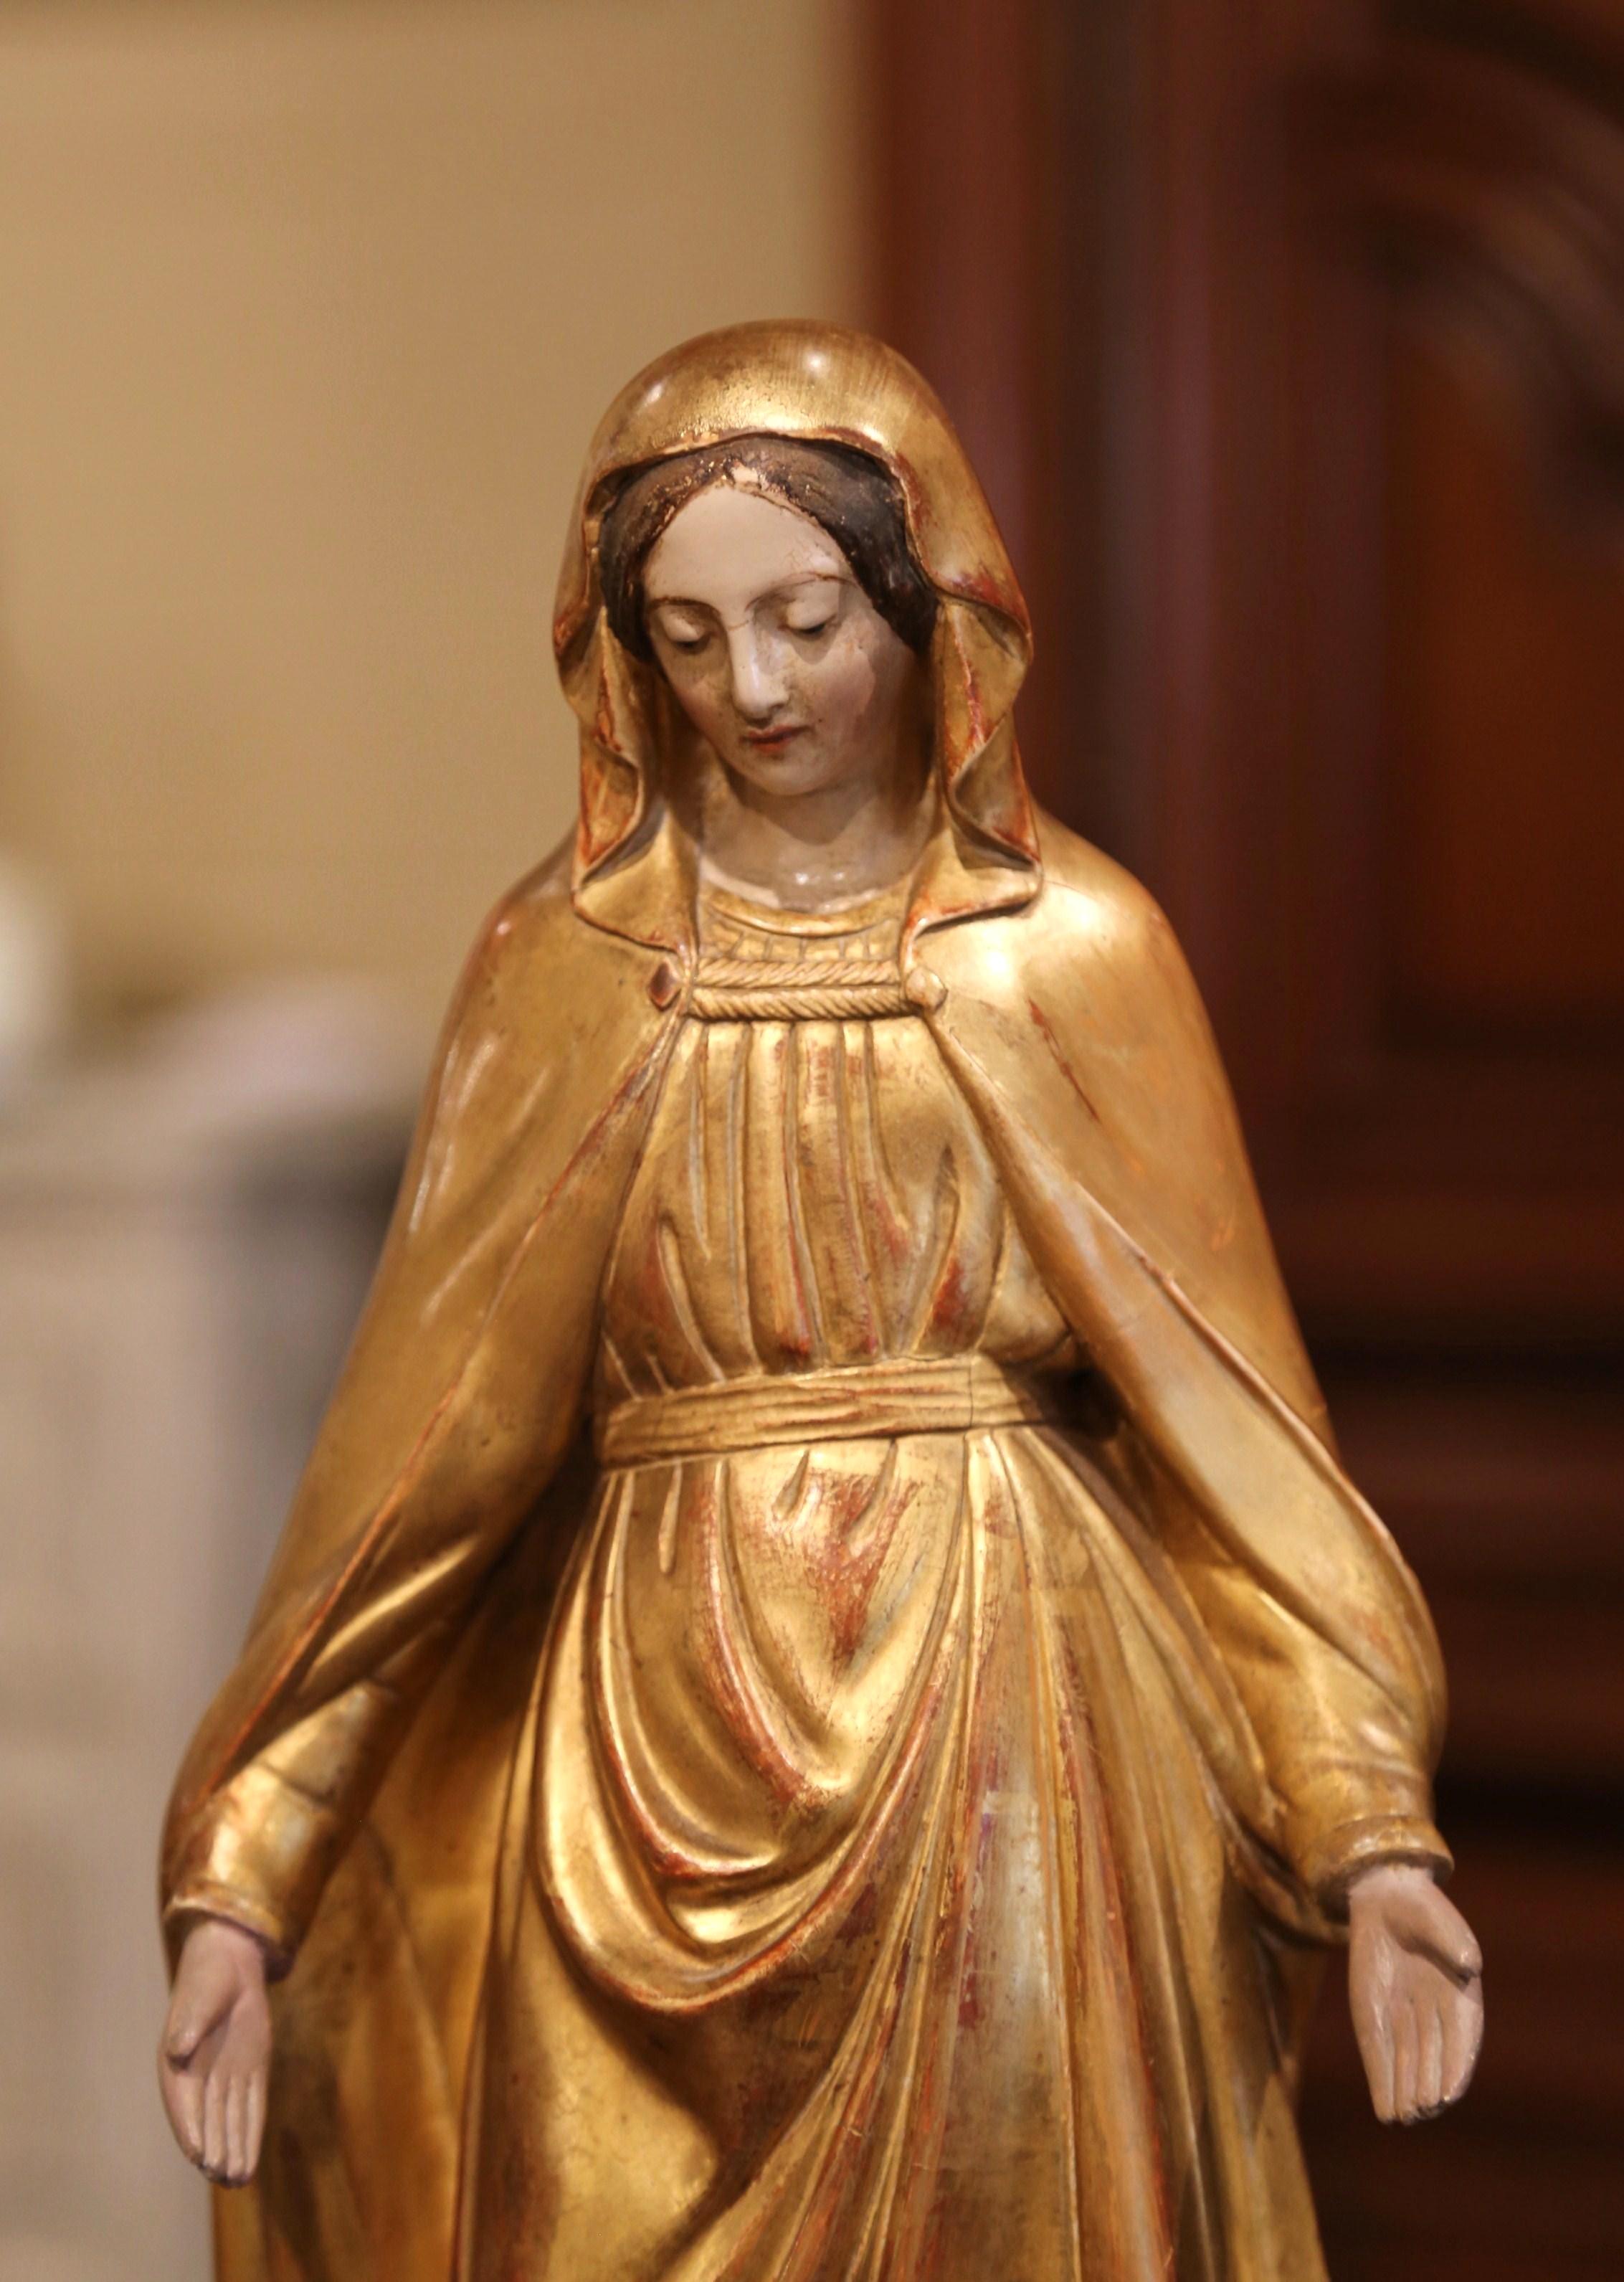 This beautiful, antique sculpture of the Virgin Mary in prayers was created in Provence, France, circa 1860. Embellished with gold leaf and polychrome finish, including discrete engraved floral motifs, the Classic religious figure is beautifully